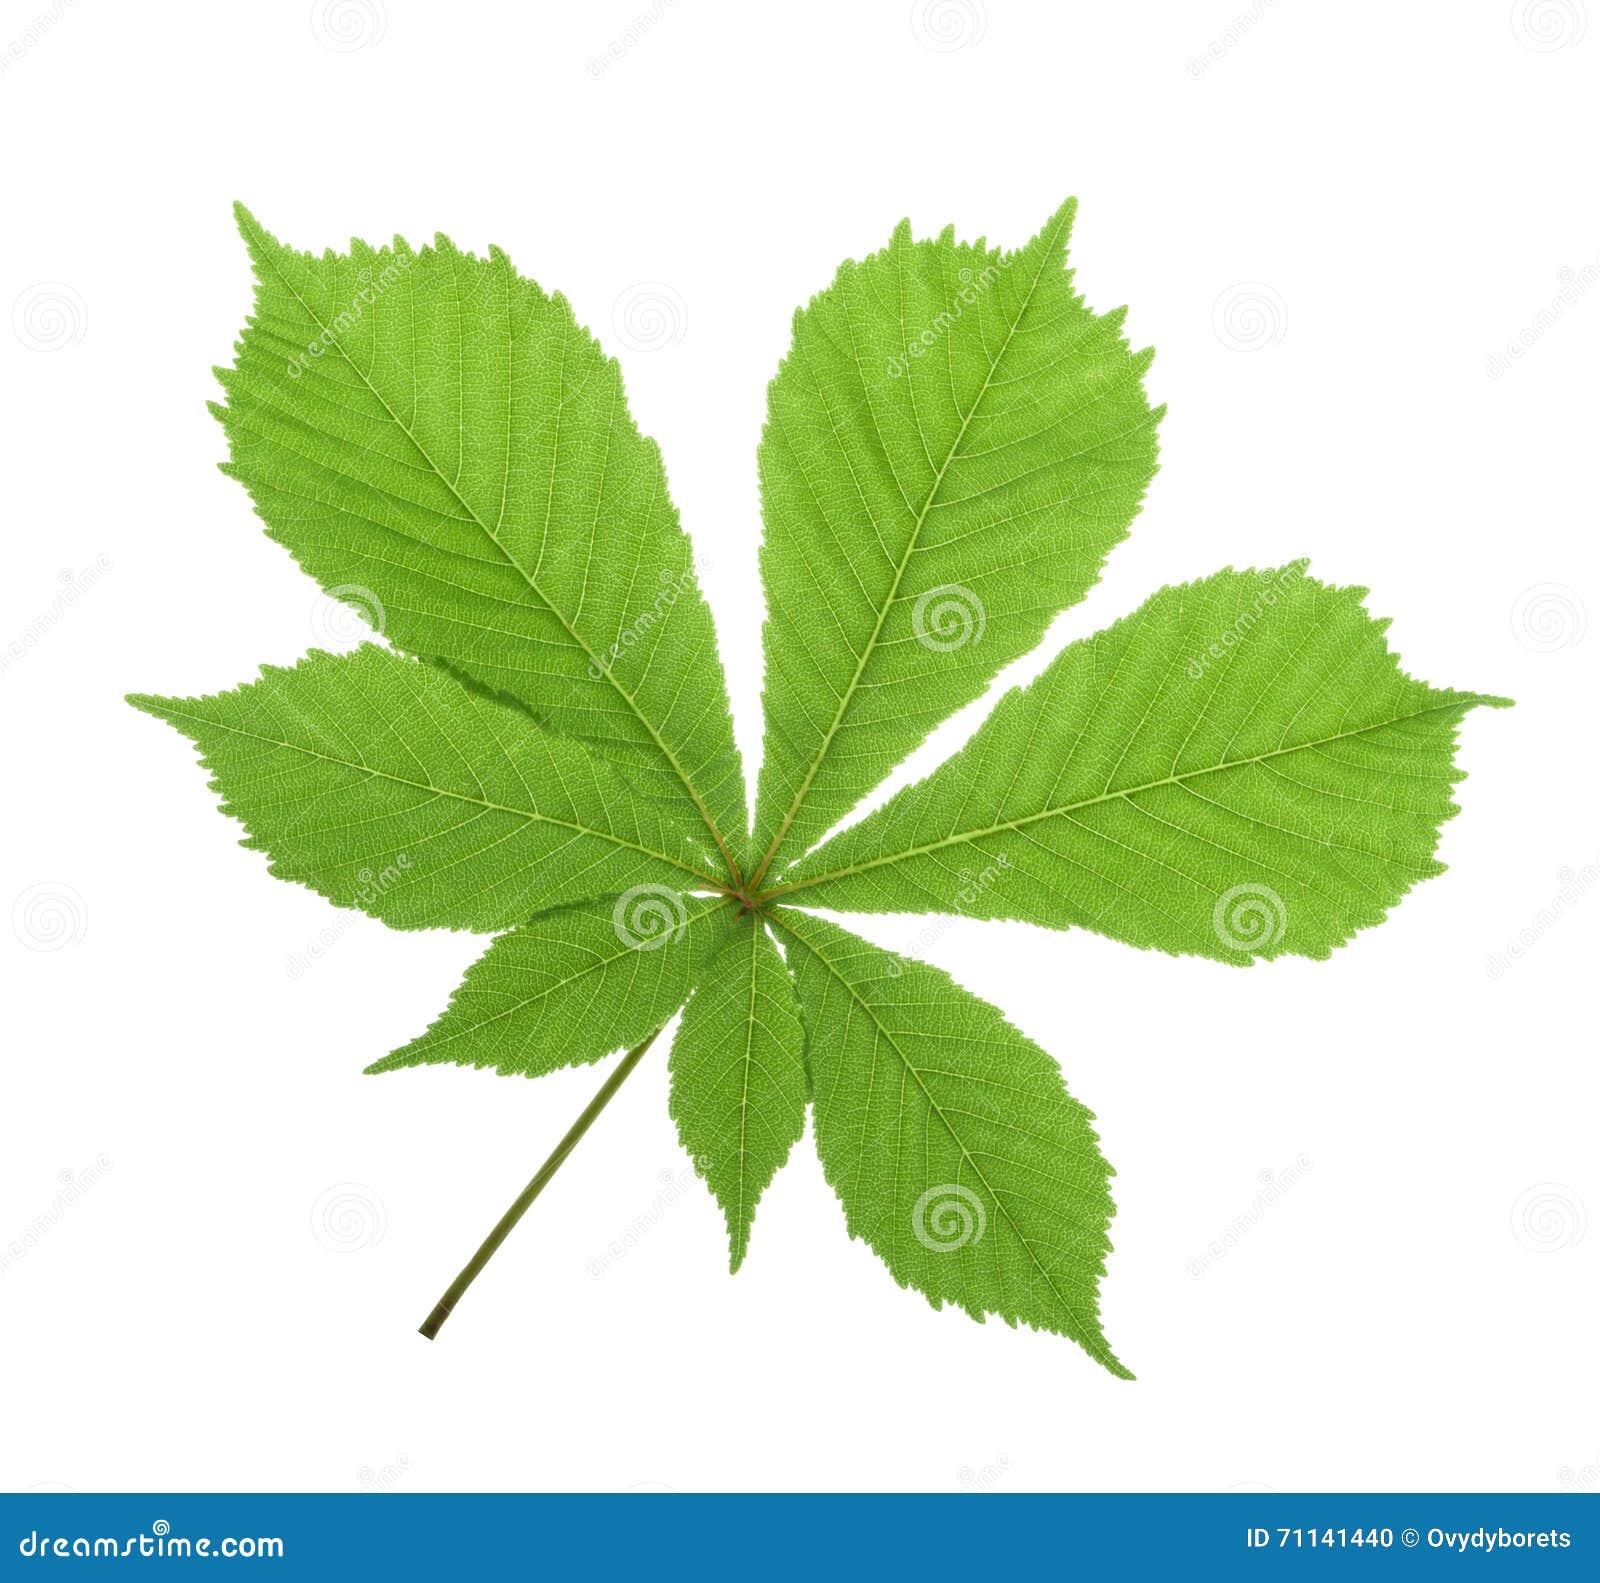 horse-chestnut (aesculus hippocastanum, conker tree) leaf . without shadow